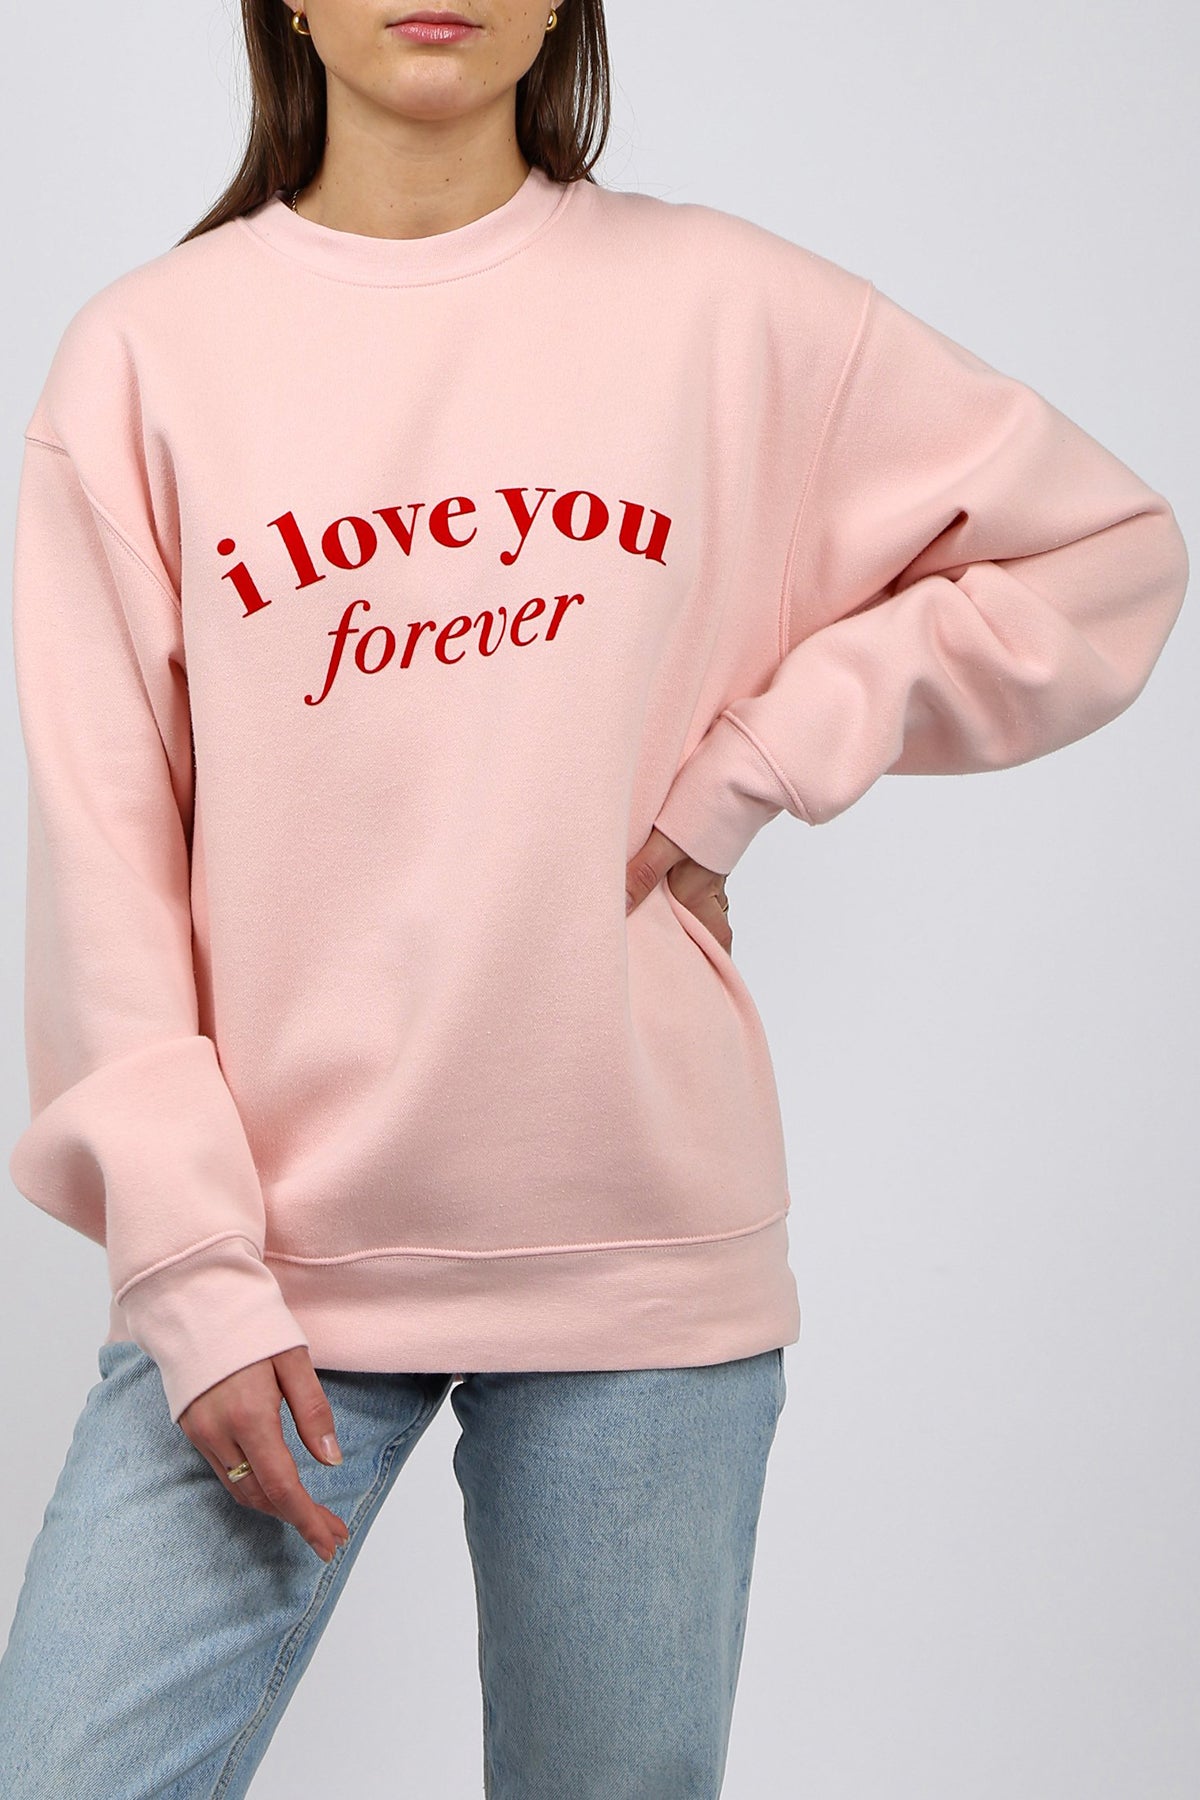 The "I LOVE YOU" Classic Crew Neck Sweatshirt | Cotton Candy